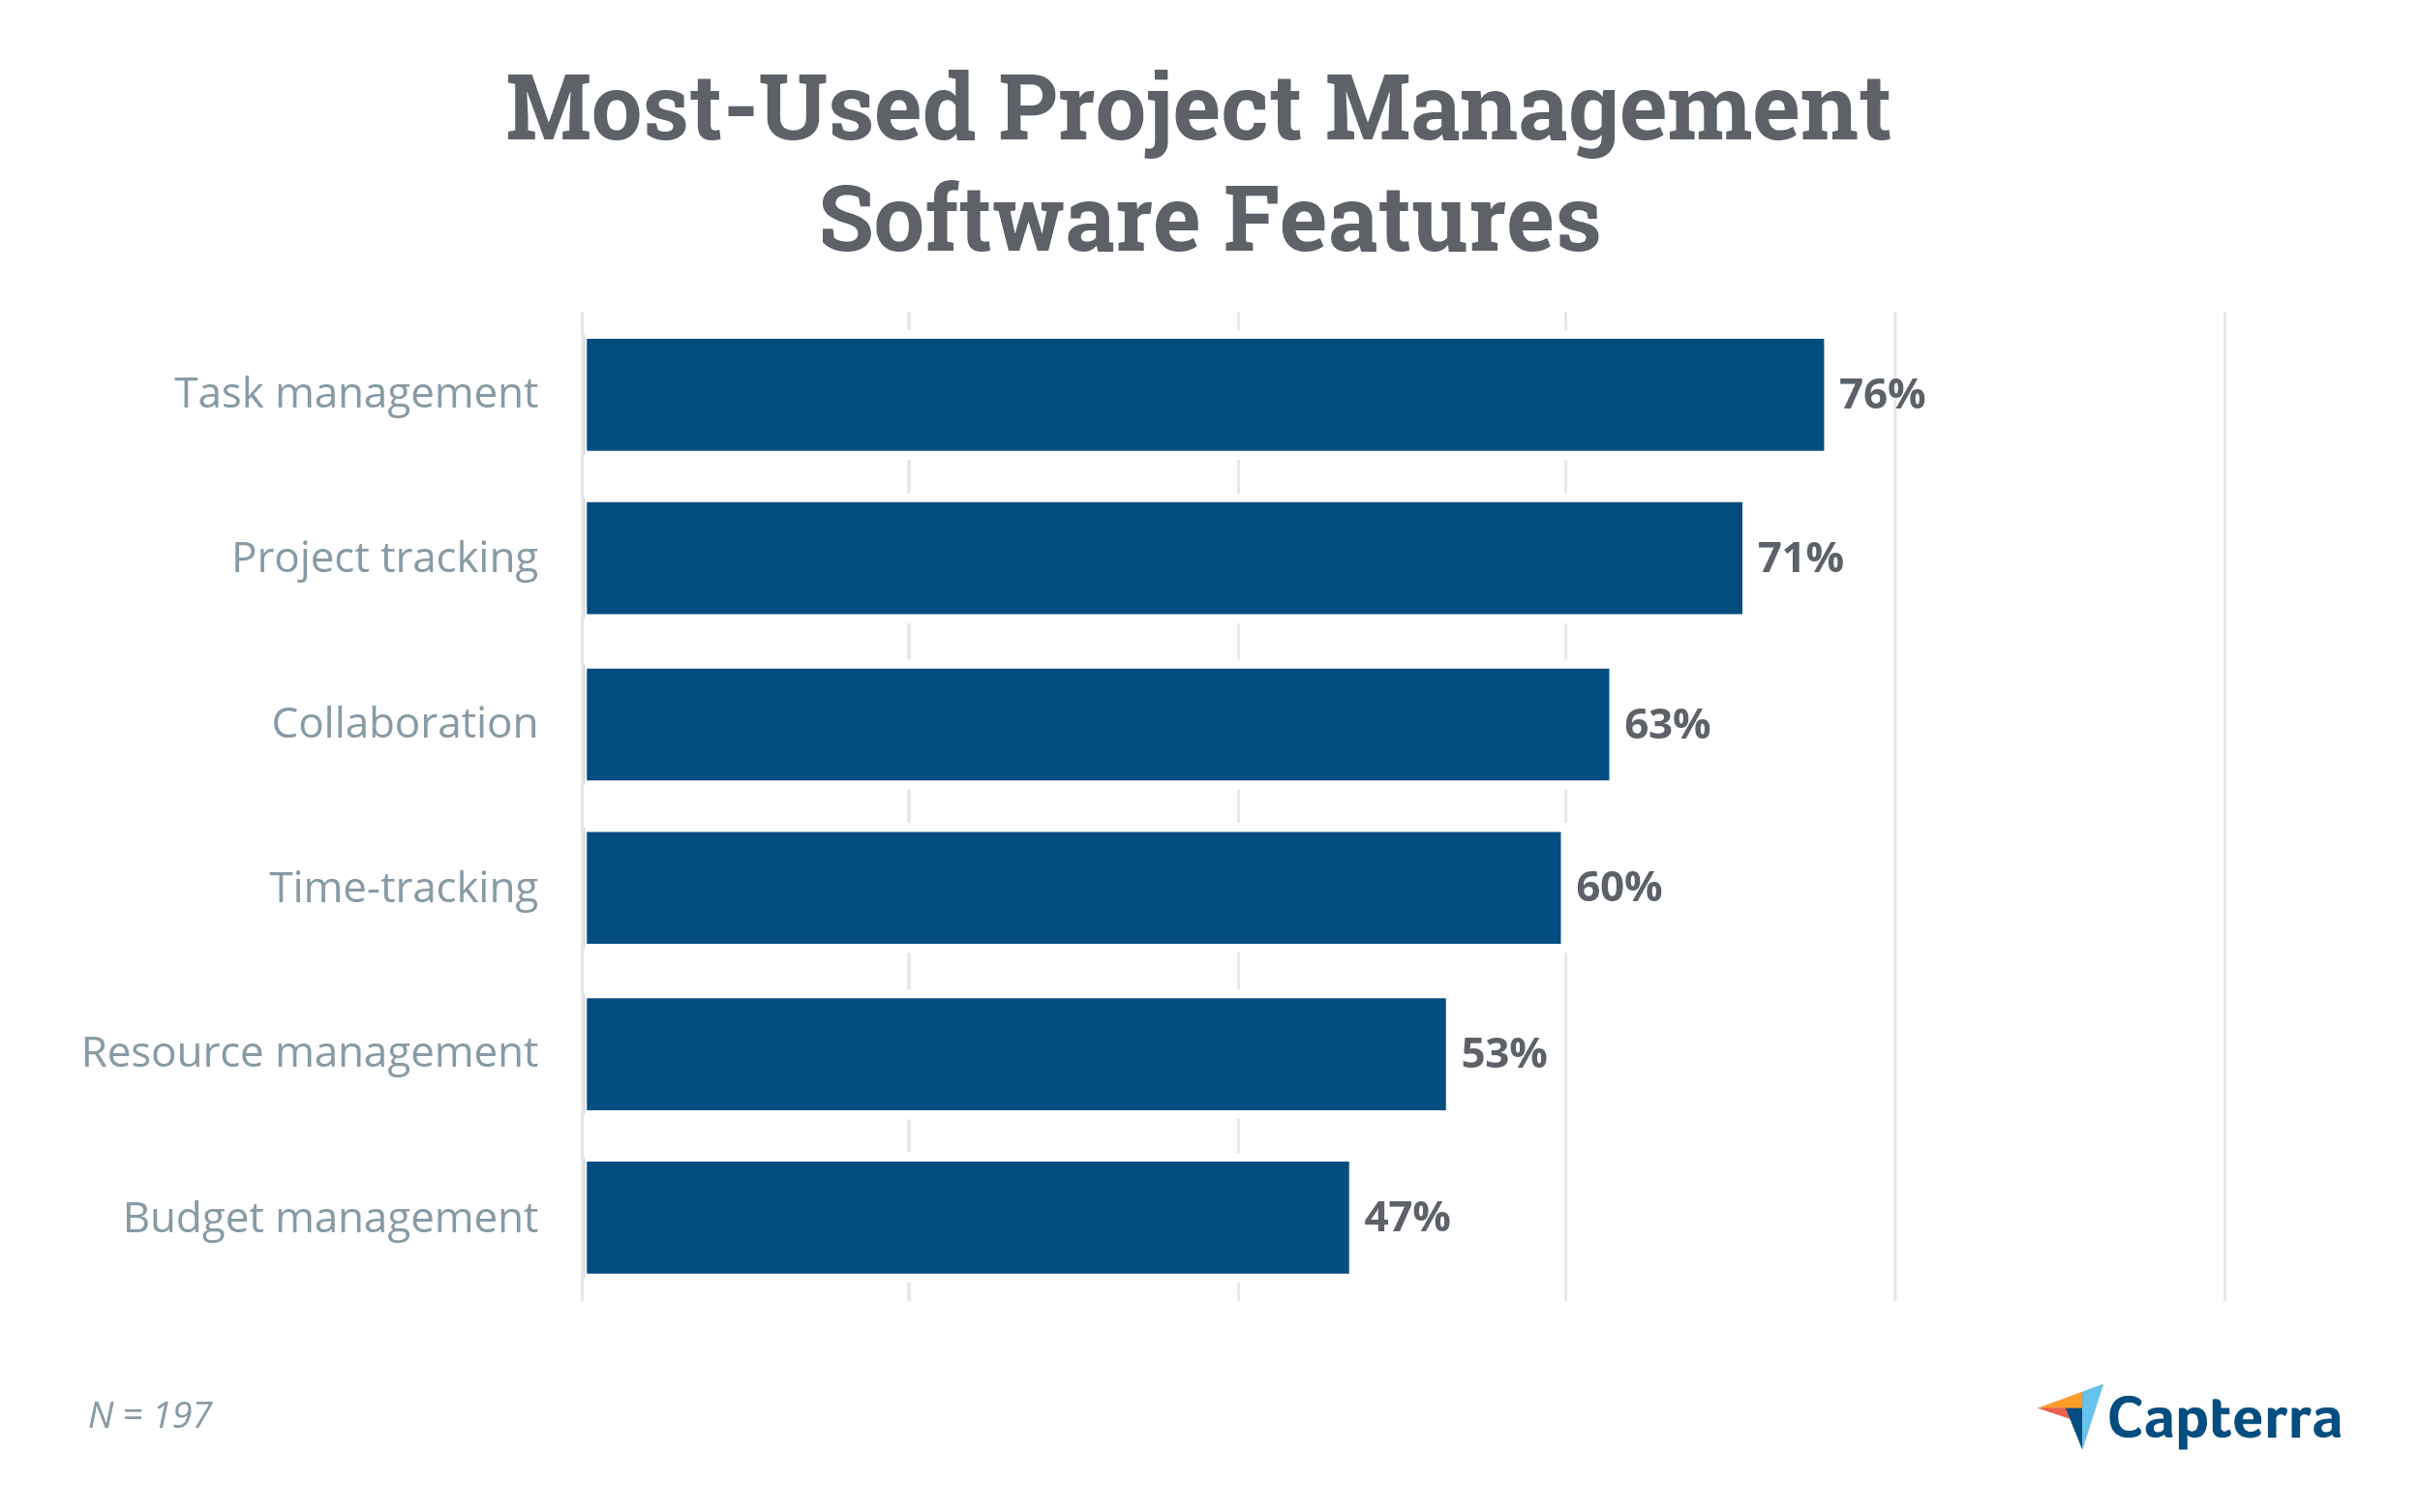 Most used PM software features